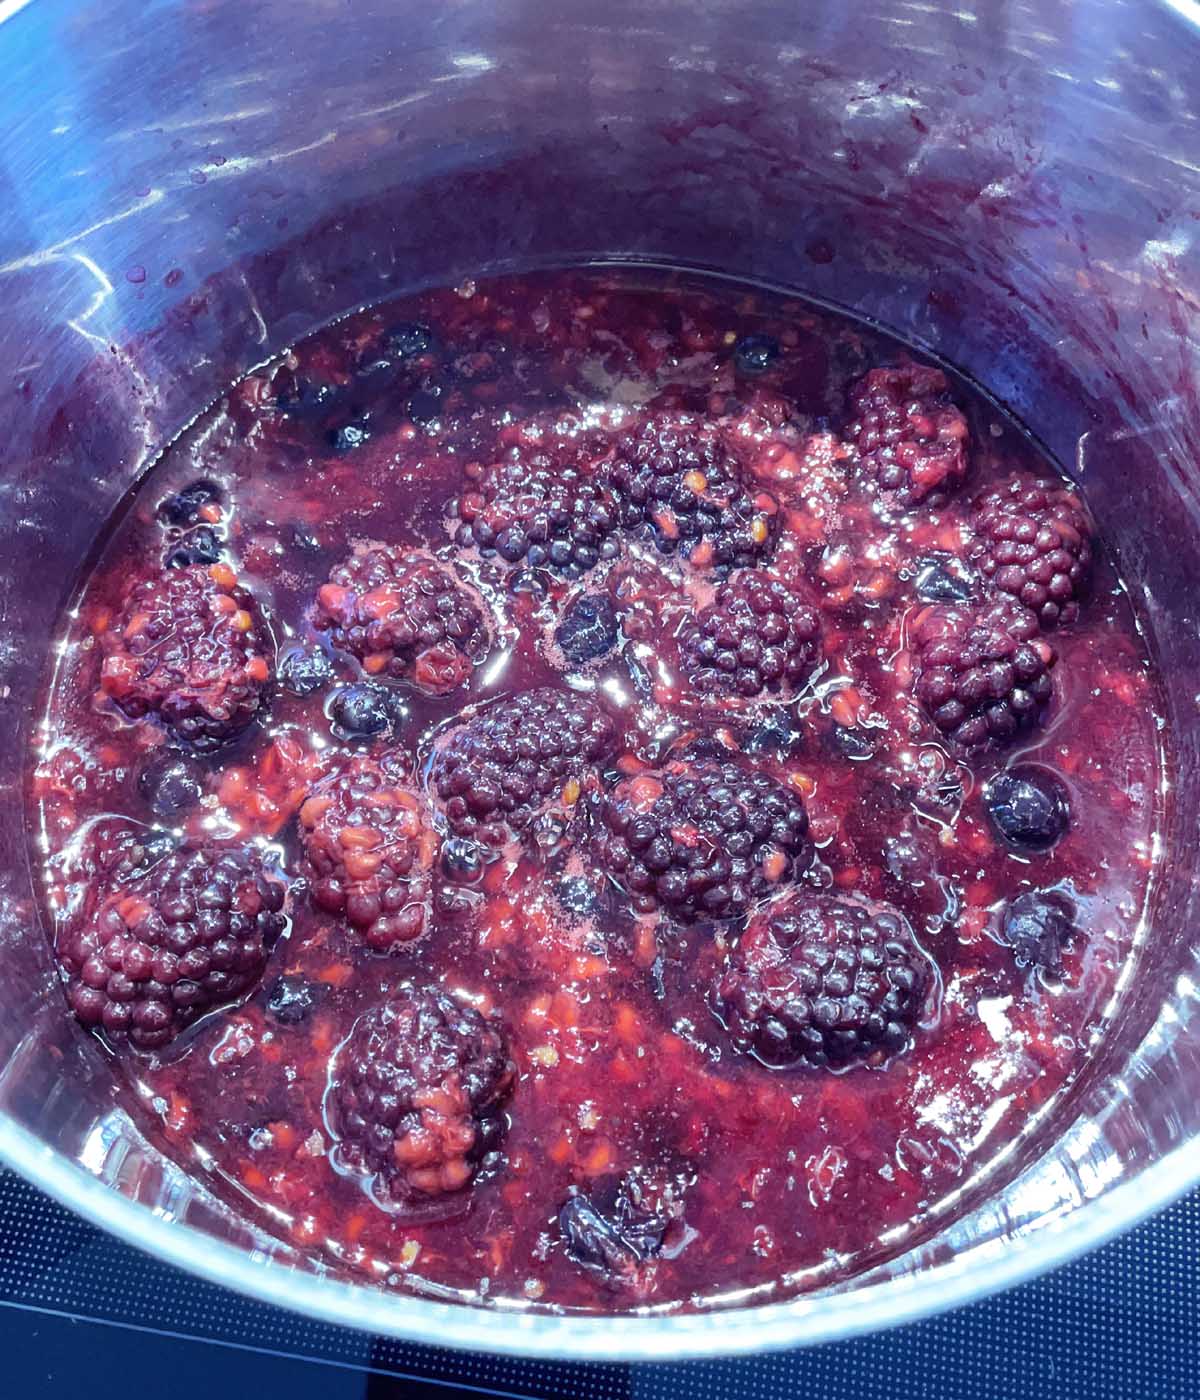 Berries and red liquid cooking in a metal pot.